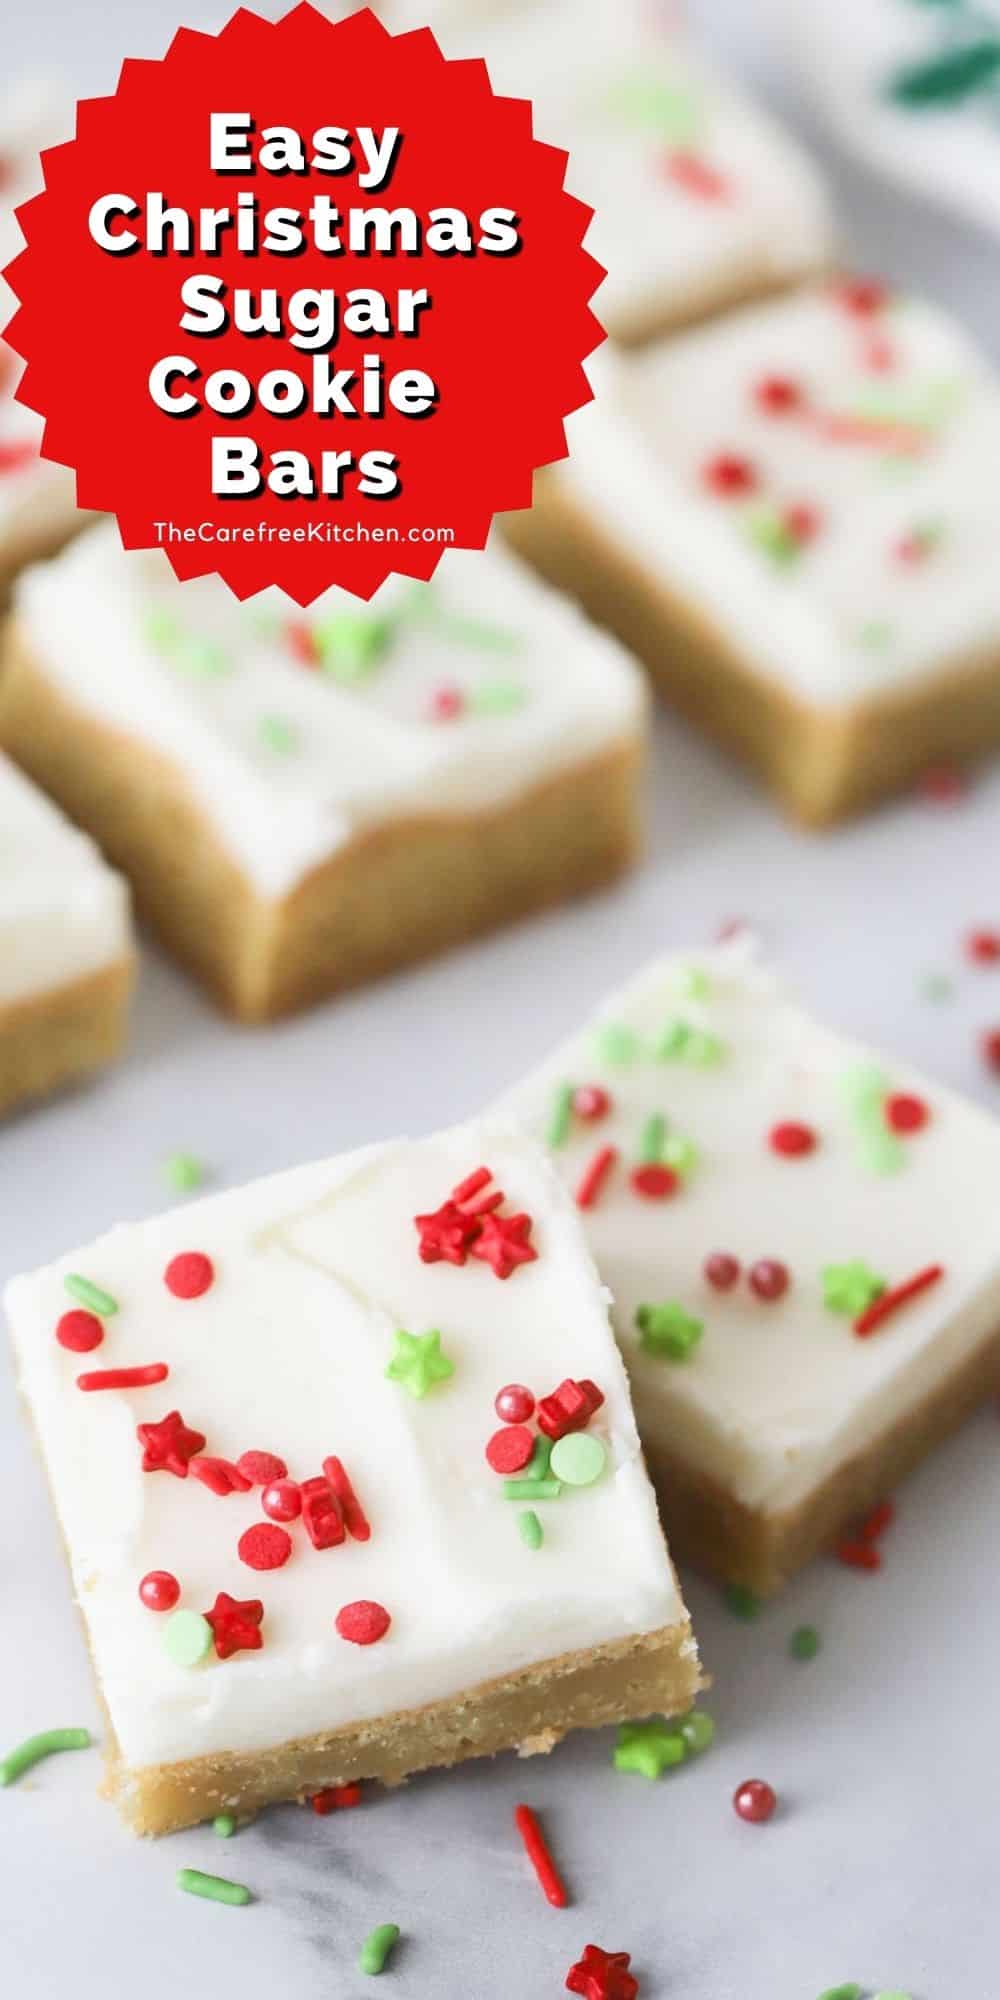 Christmas Sugar Cookie Bars - The Carefree Kitchen